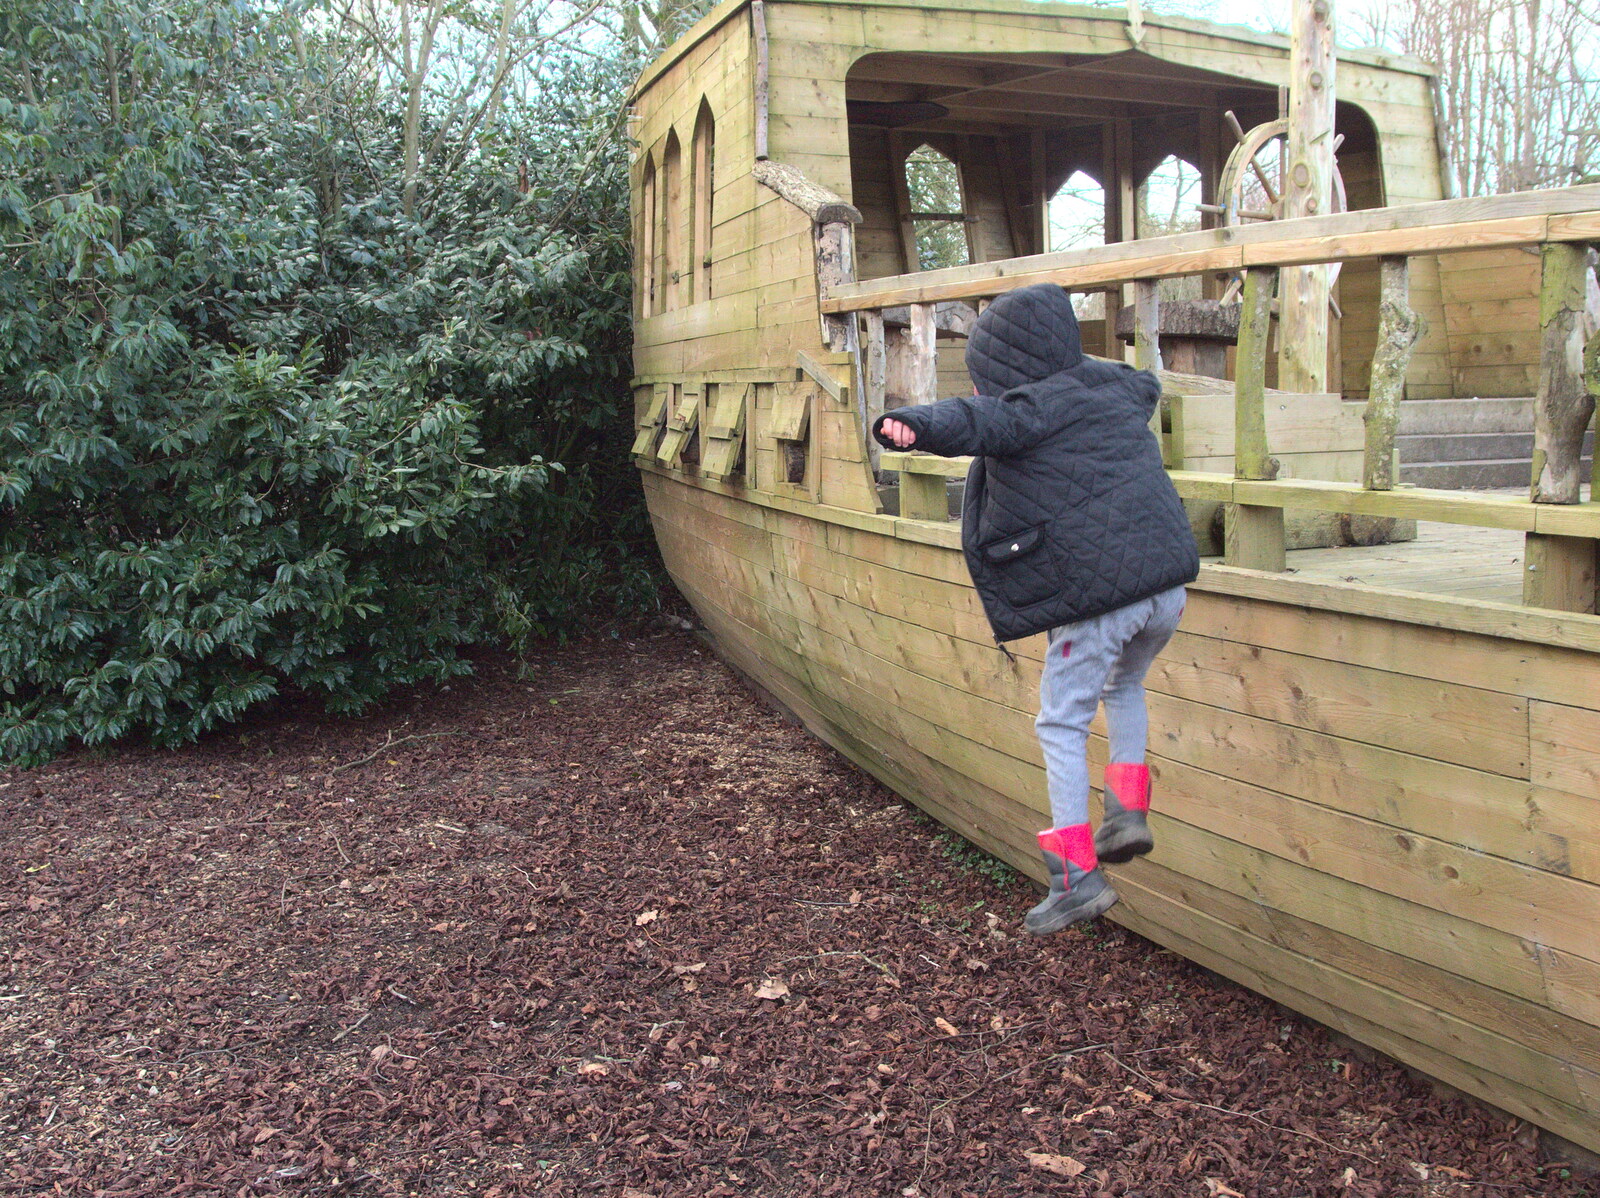 February Cactus Randomness, London and Brome, Suffolk - 14th February 2016: Harry jumps off the ship